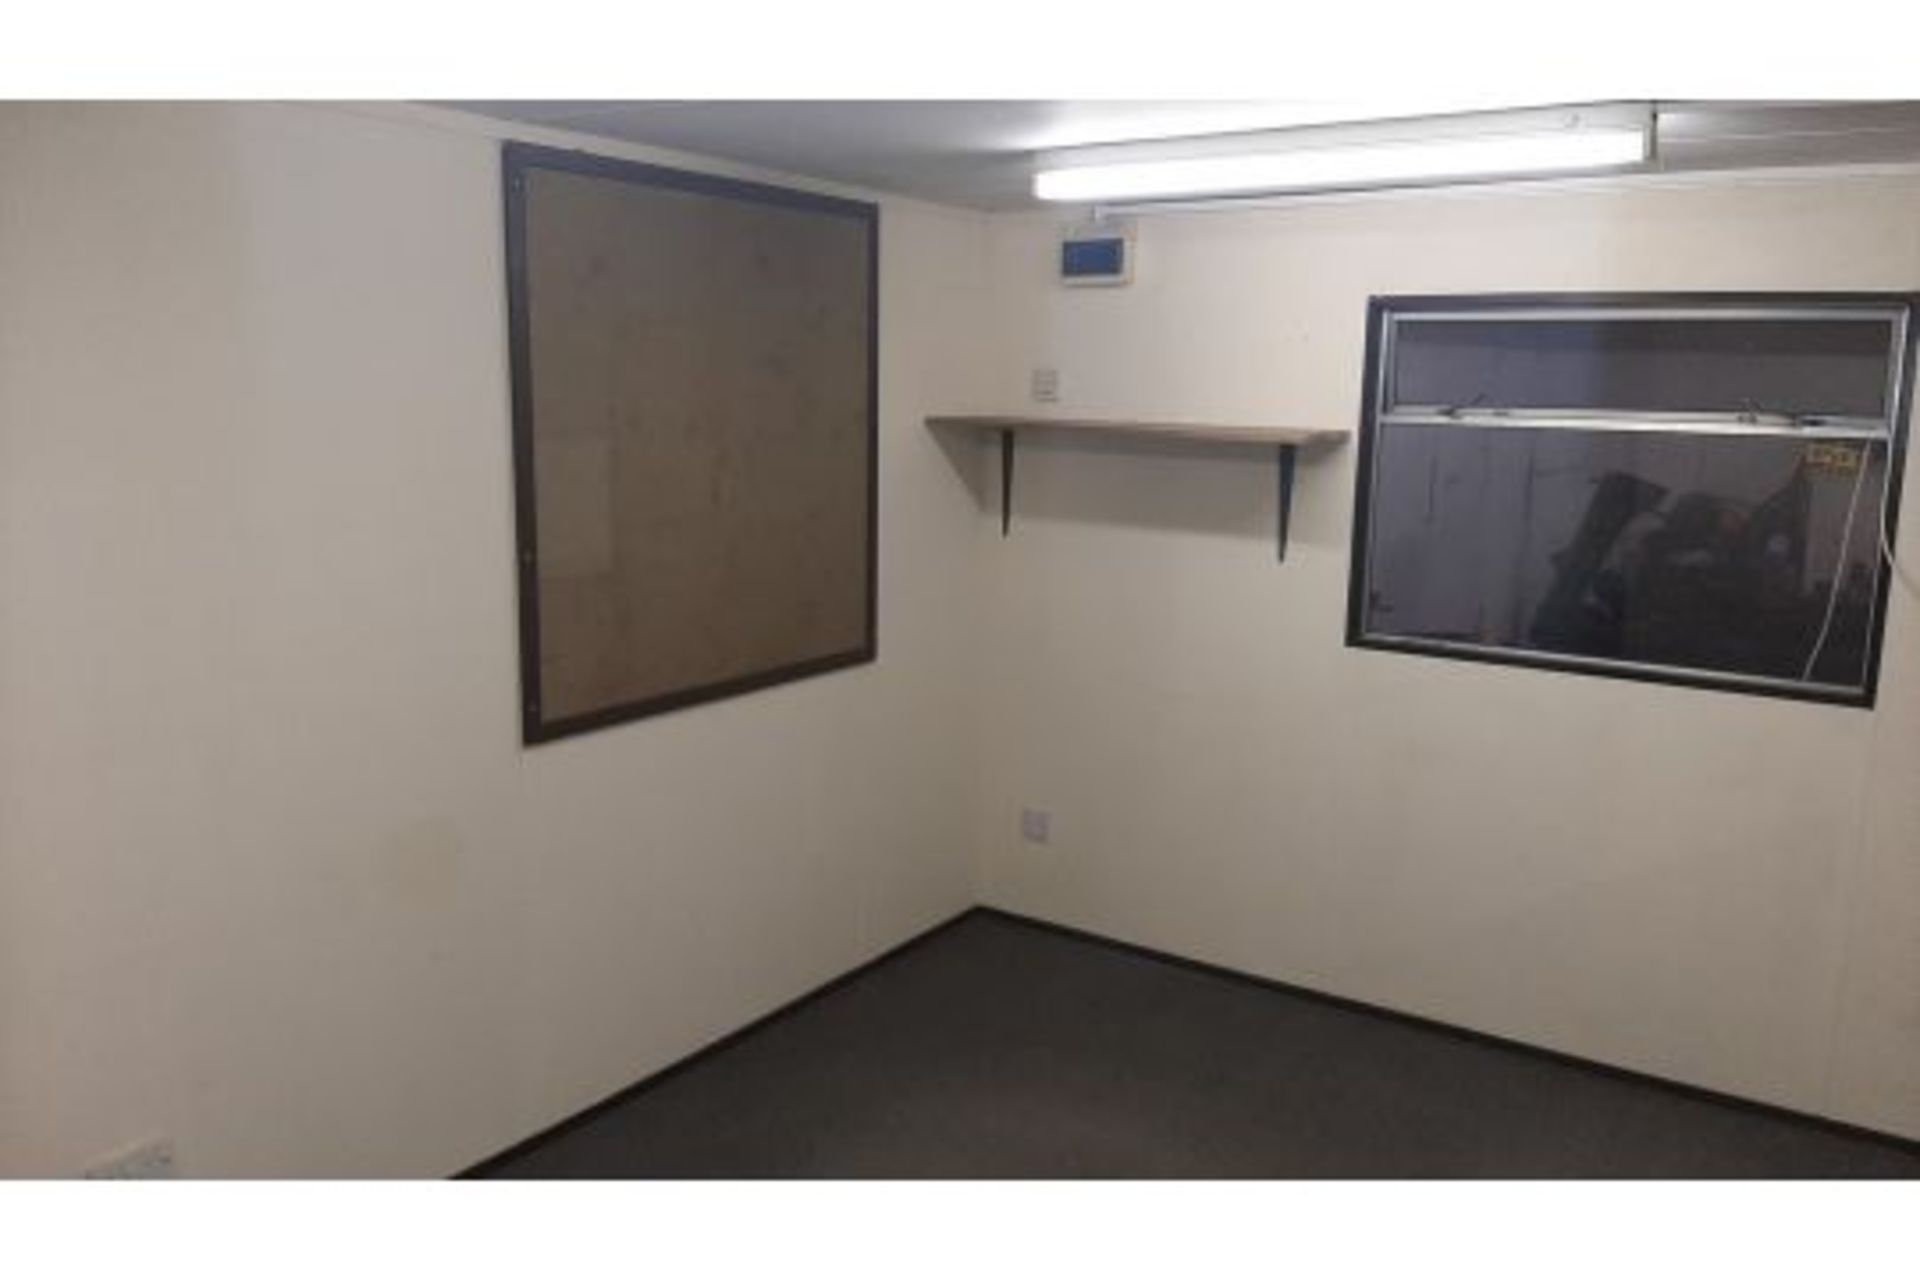 10ft x 32ft jack leg cabin. With two 10ftx 14ft rooms and hall. Used as office inside building. - Bild 16 aus 18